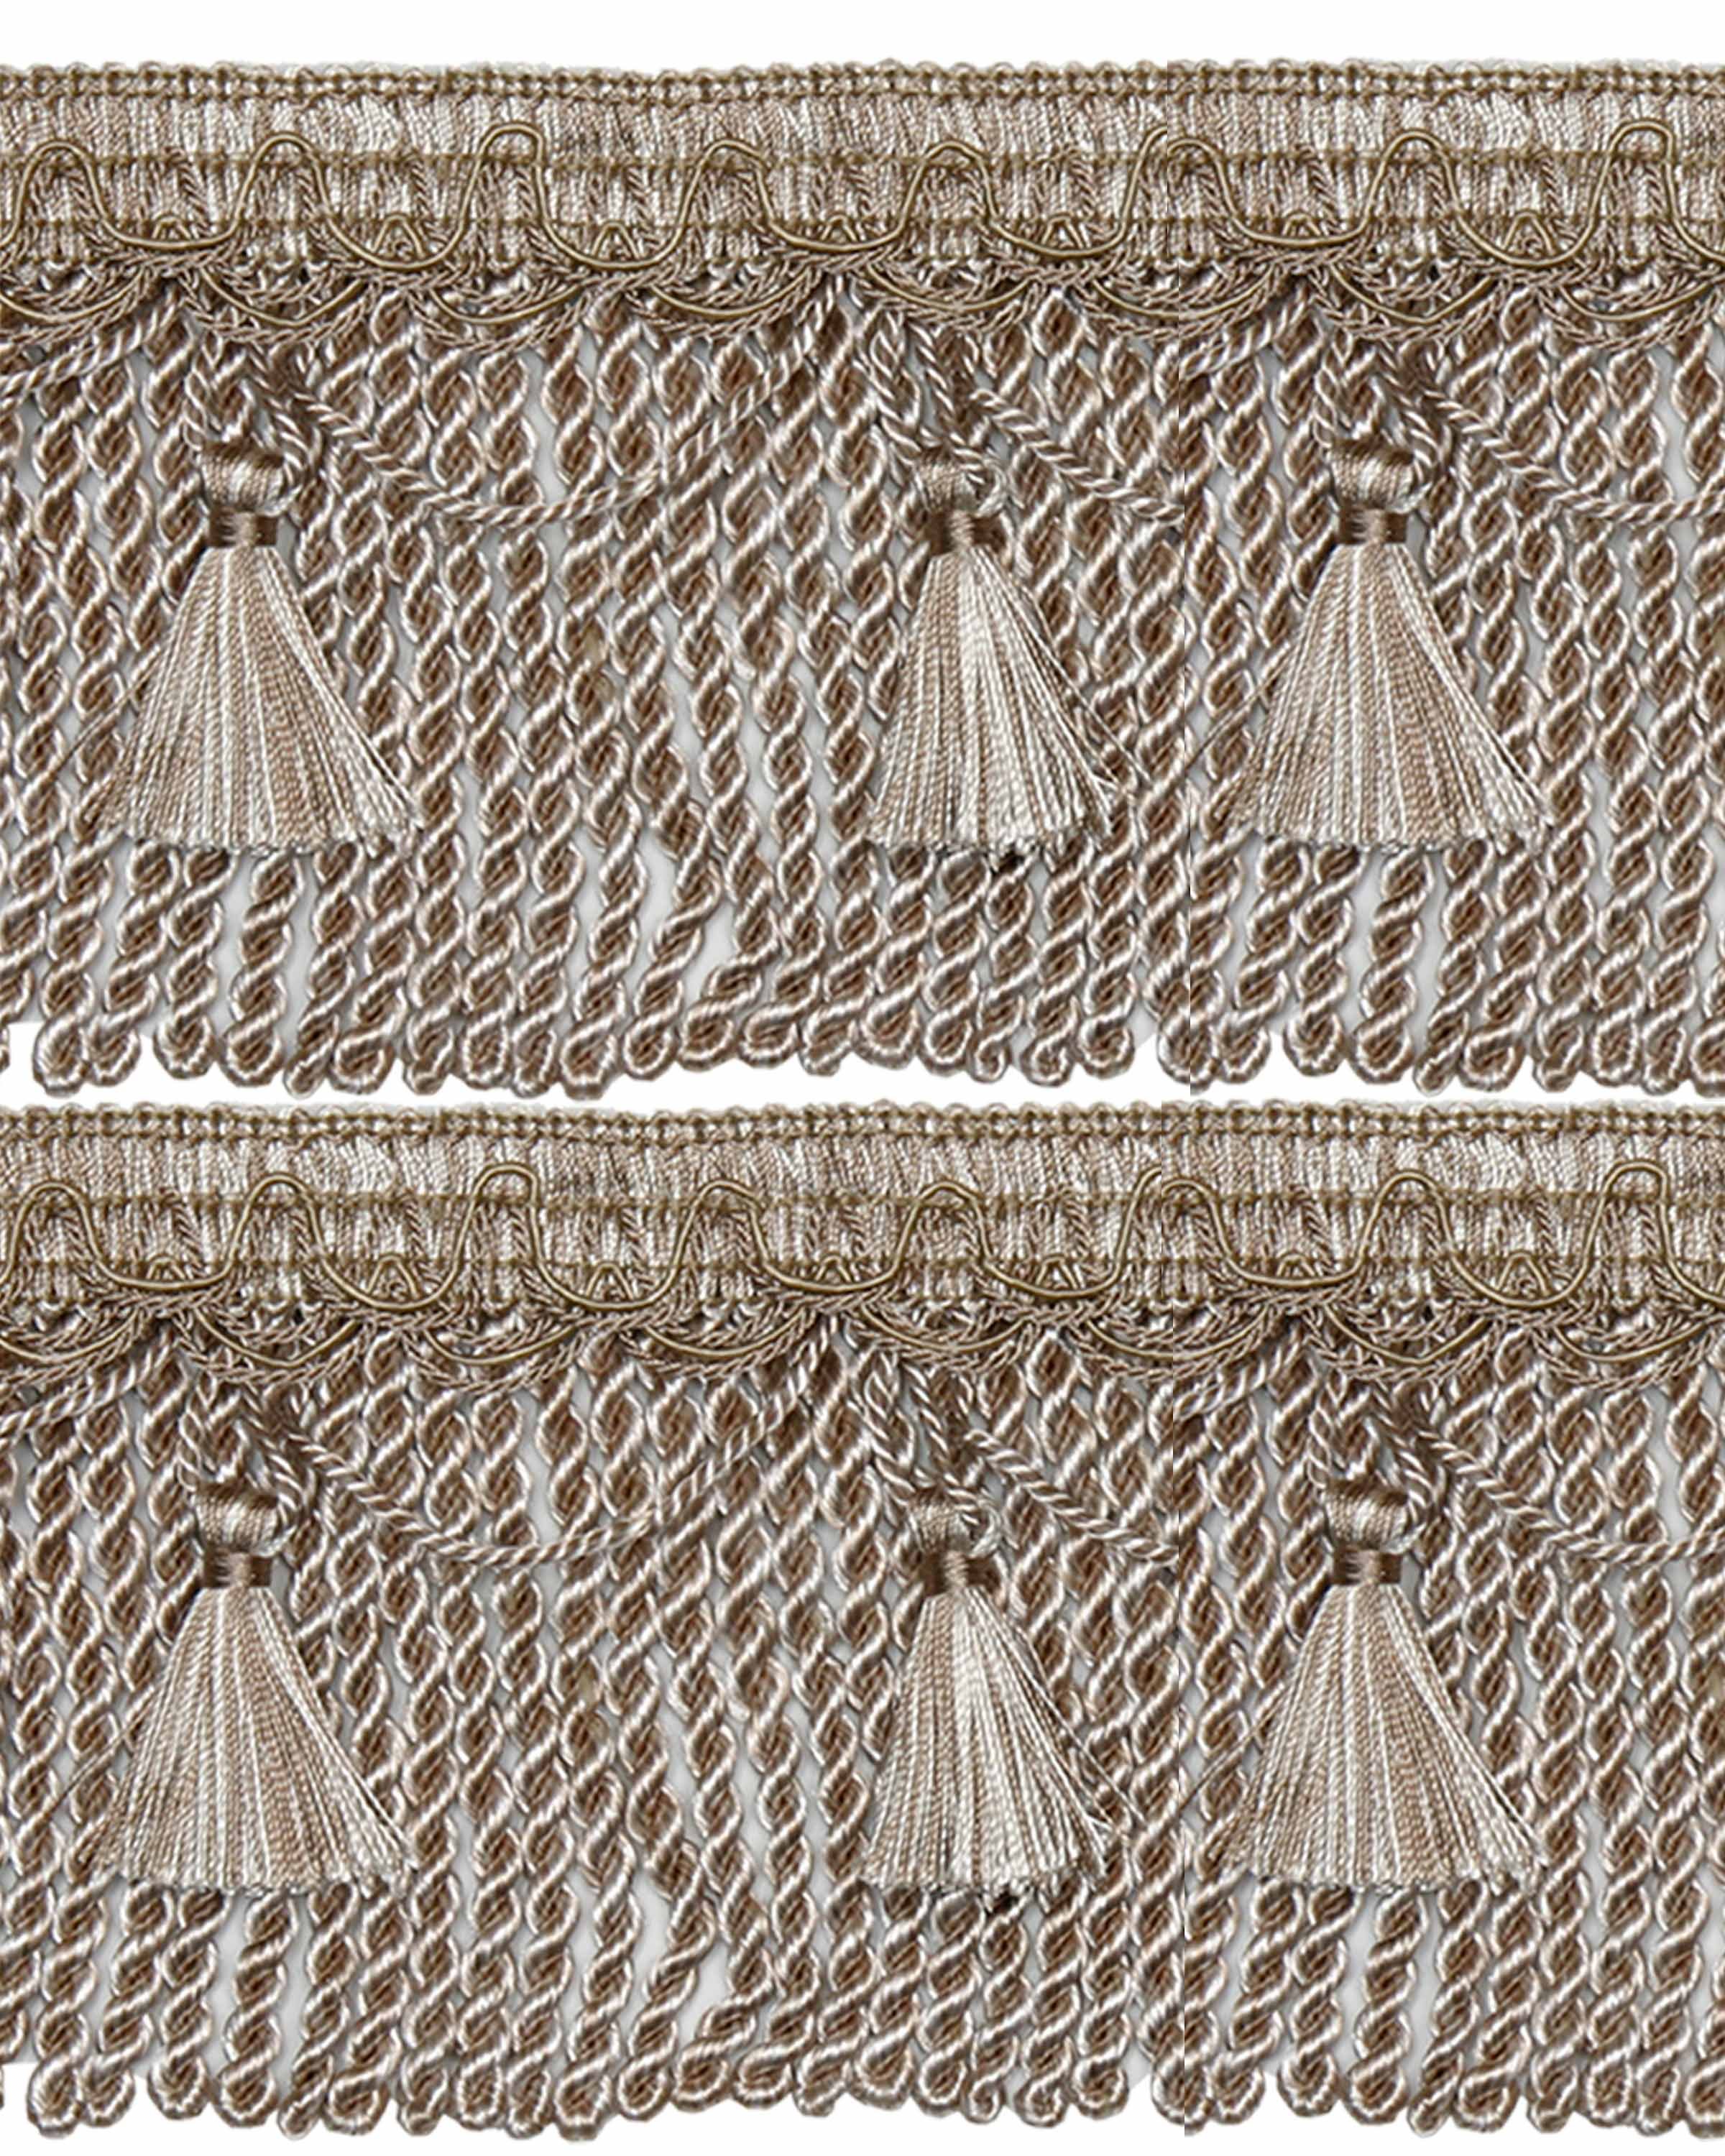 Bullion Cord Fringe on Braid with Scalloped Tassel - Beige 105mm Price is for 5 metres 